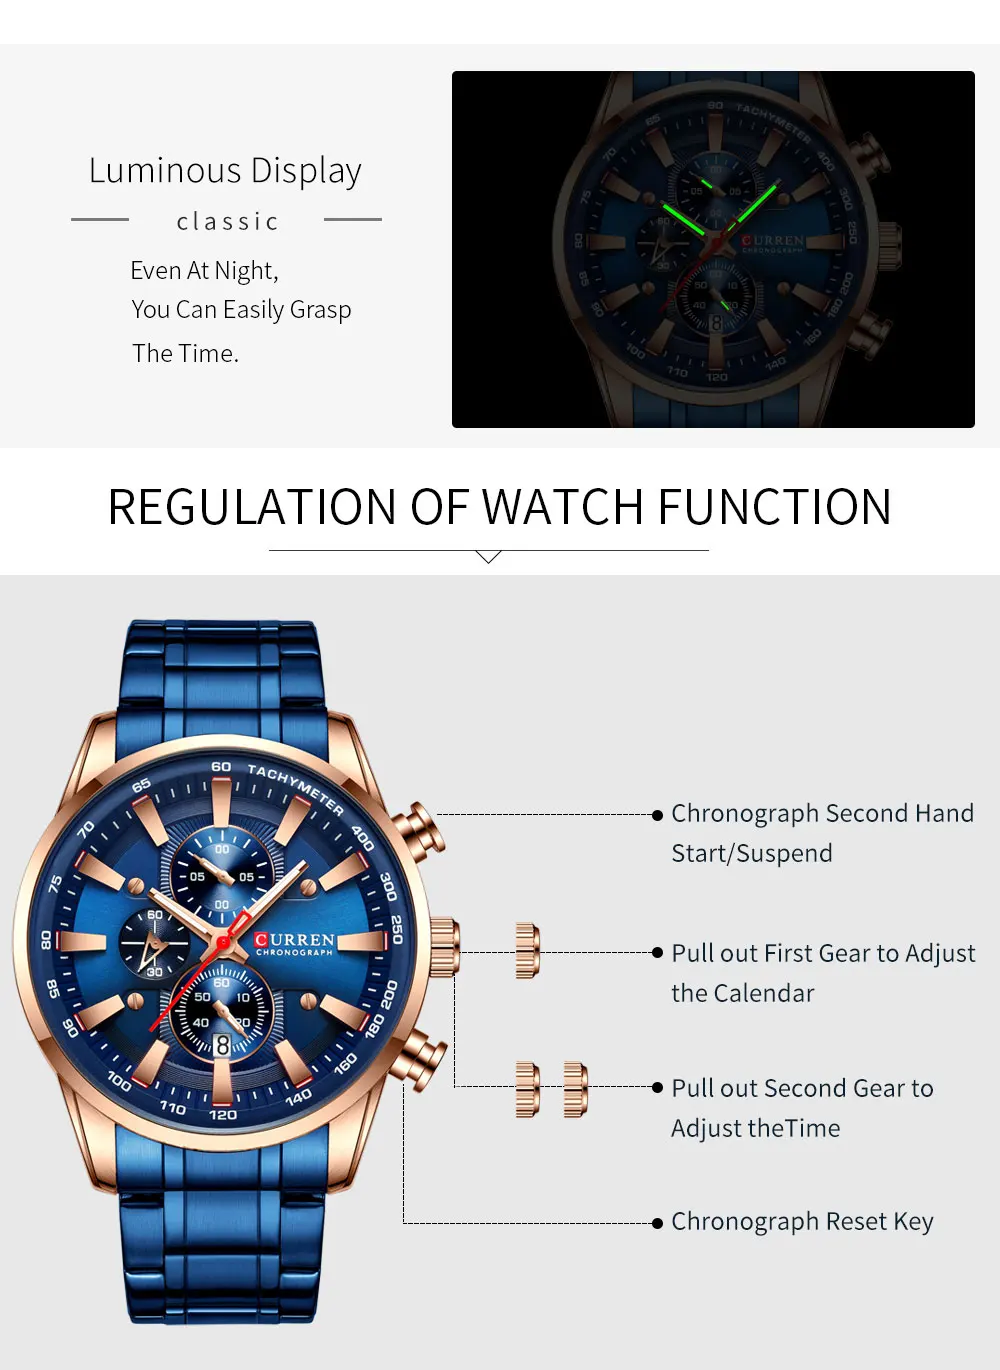 Watch features